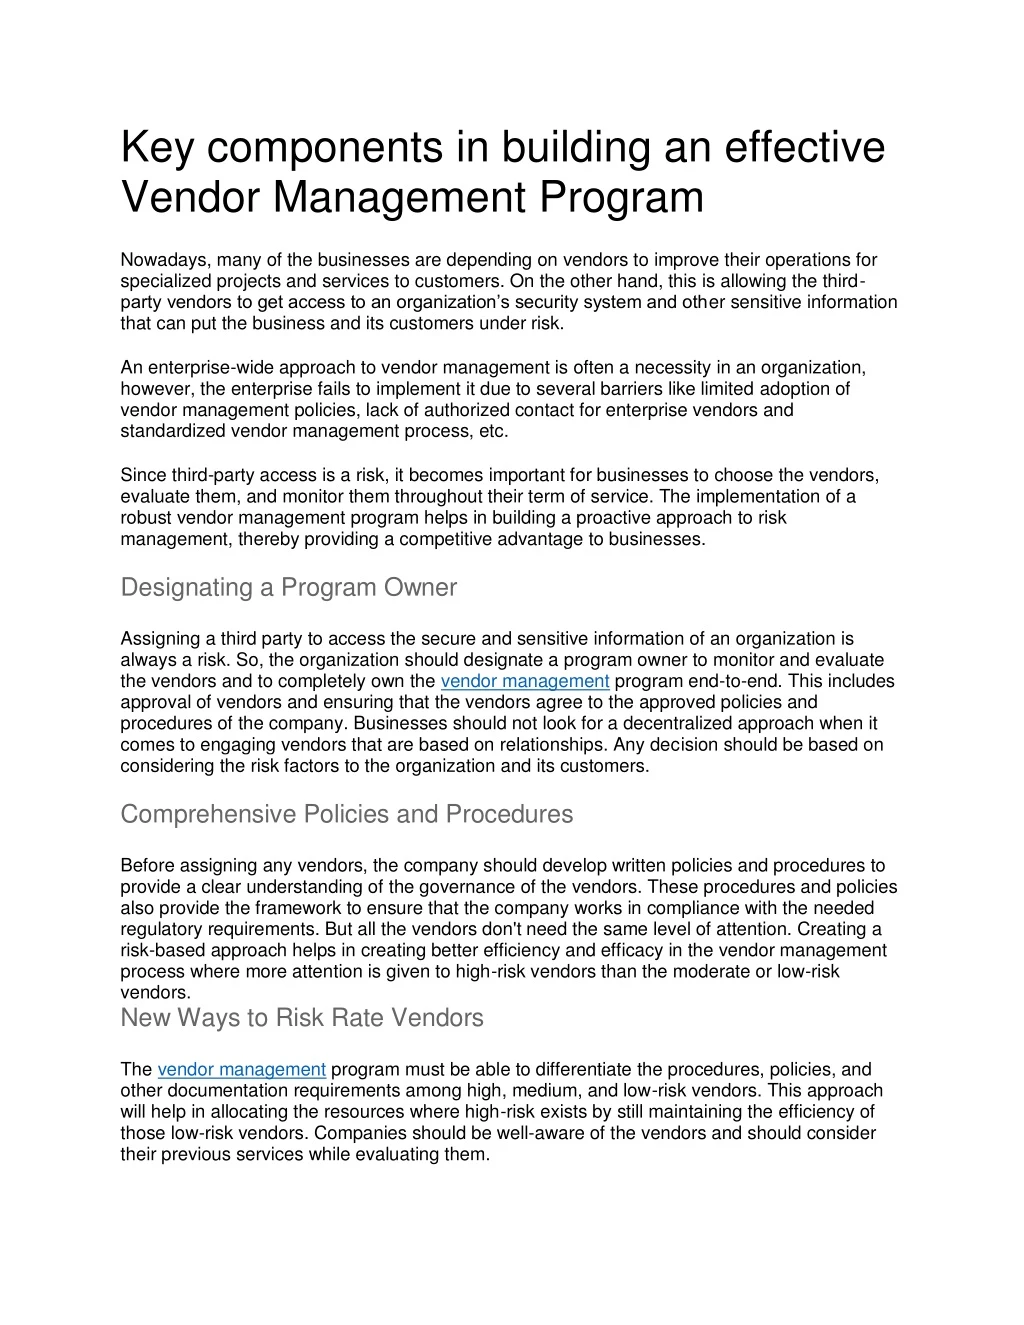 key components in building an effective vendor